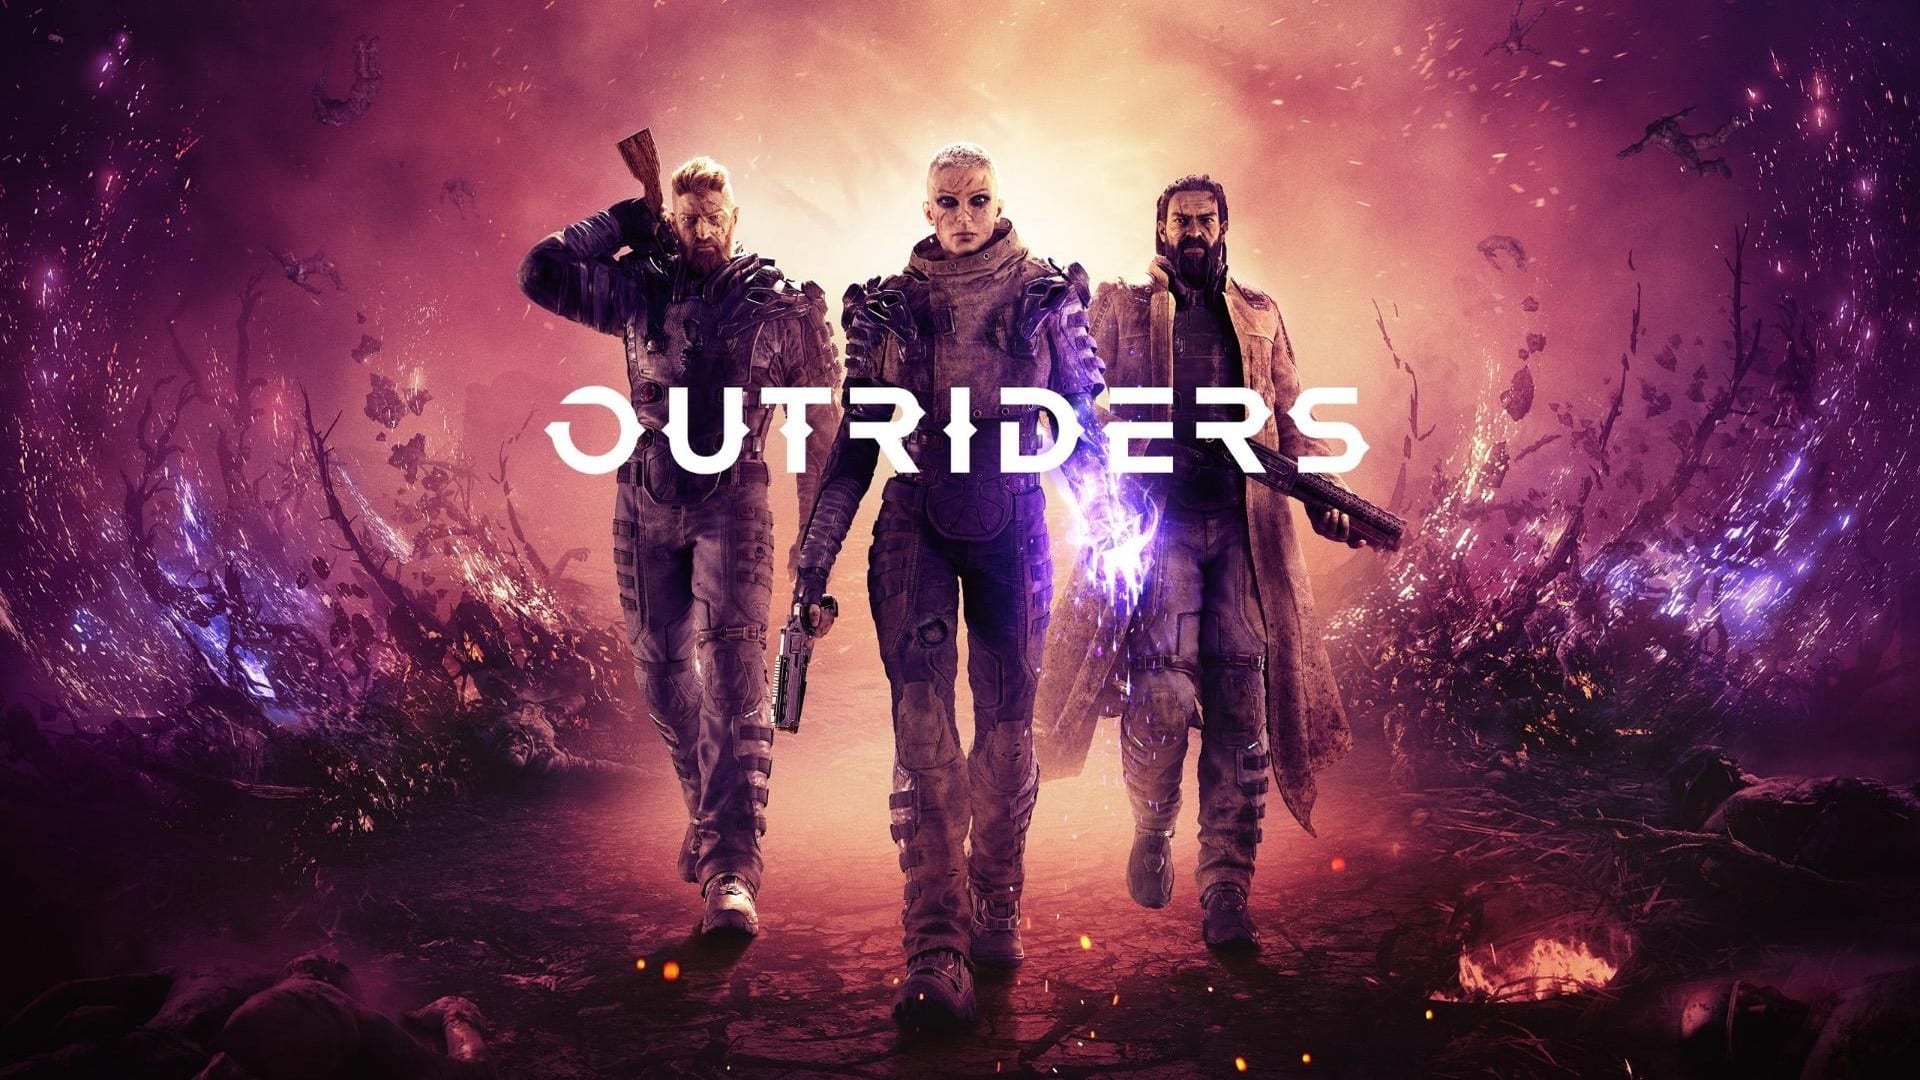 New Outriders Gameplay Trailer Showcases First Look At Upcoming RPG Shooter